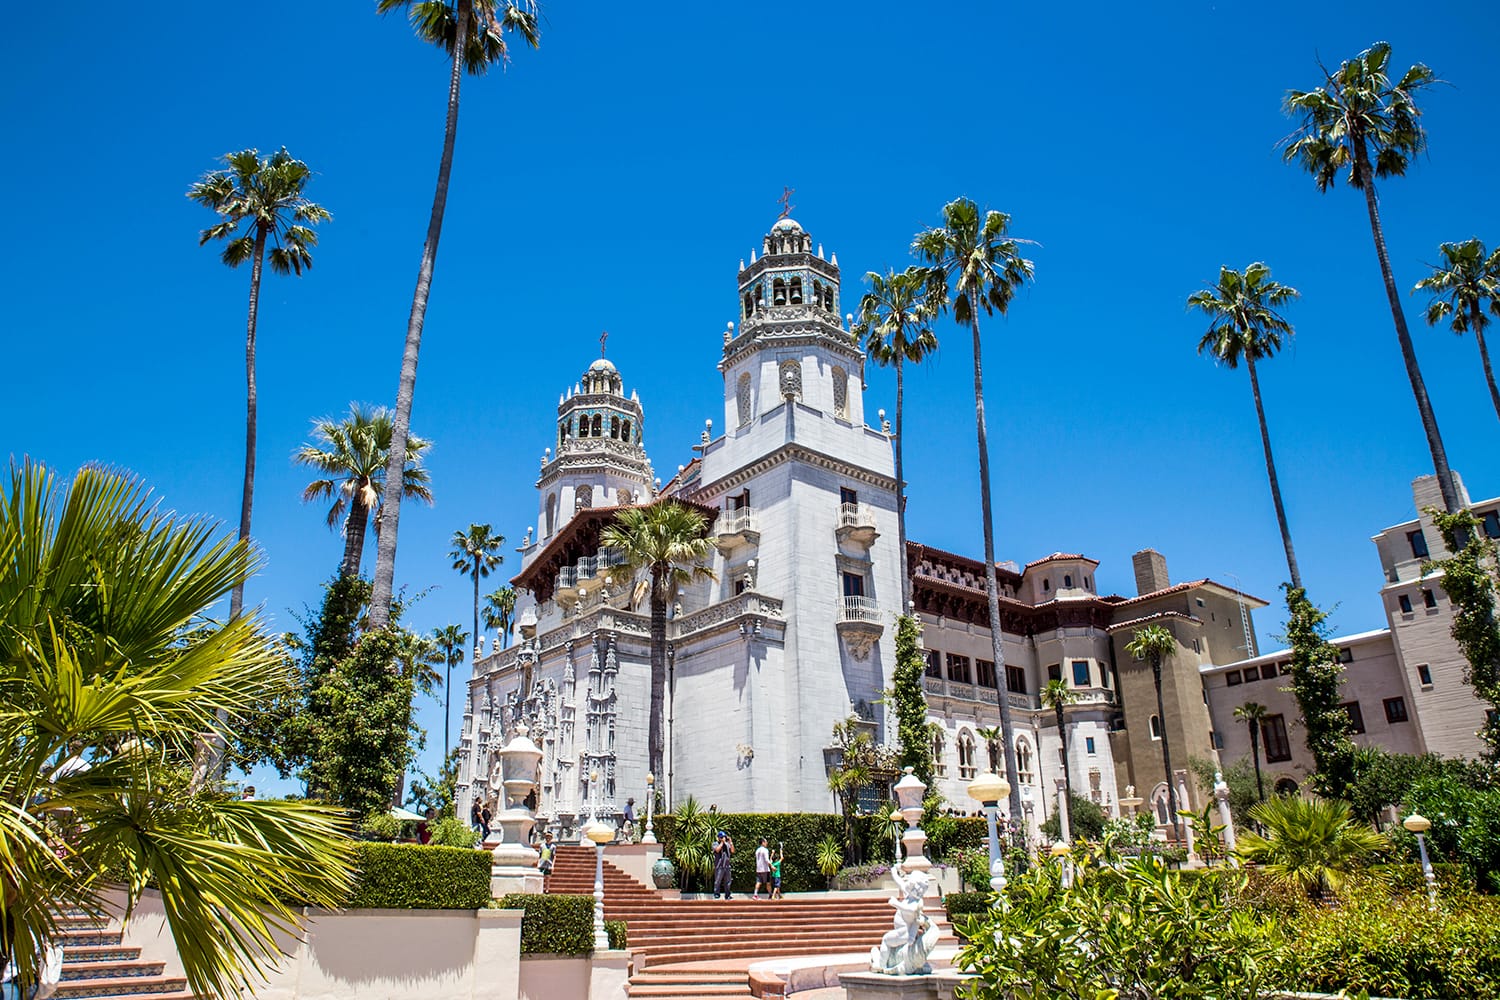 East side view of Hearst Castle in California, USA